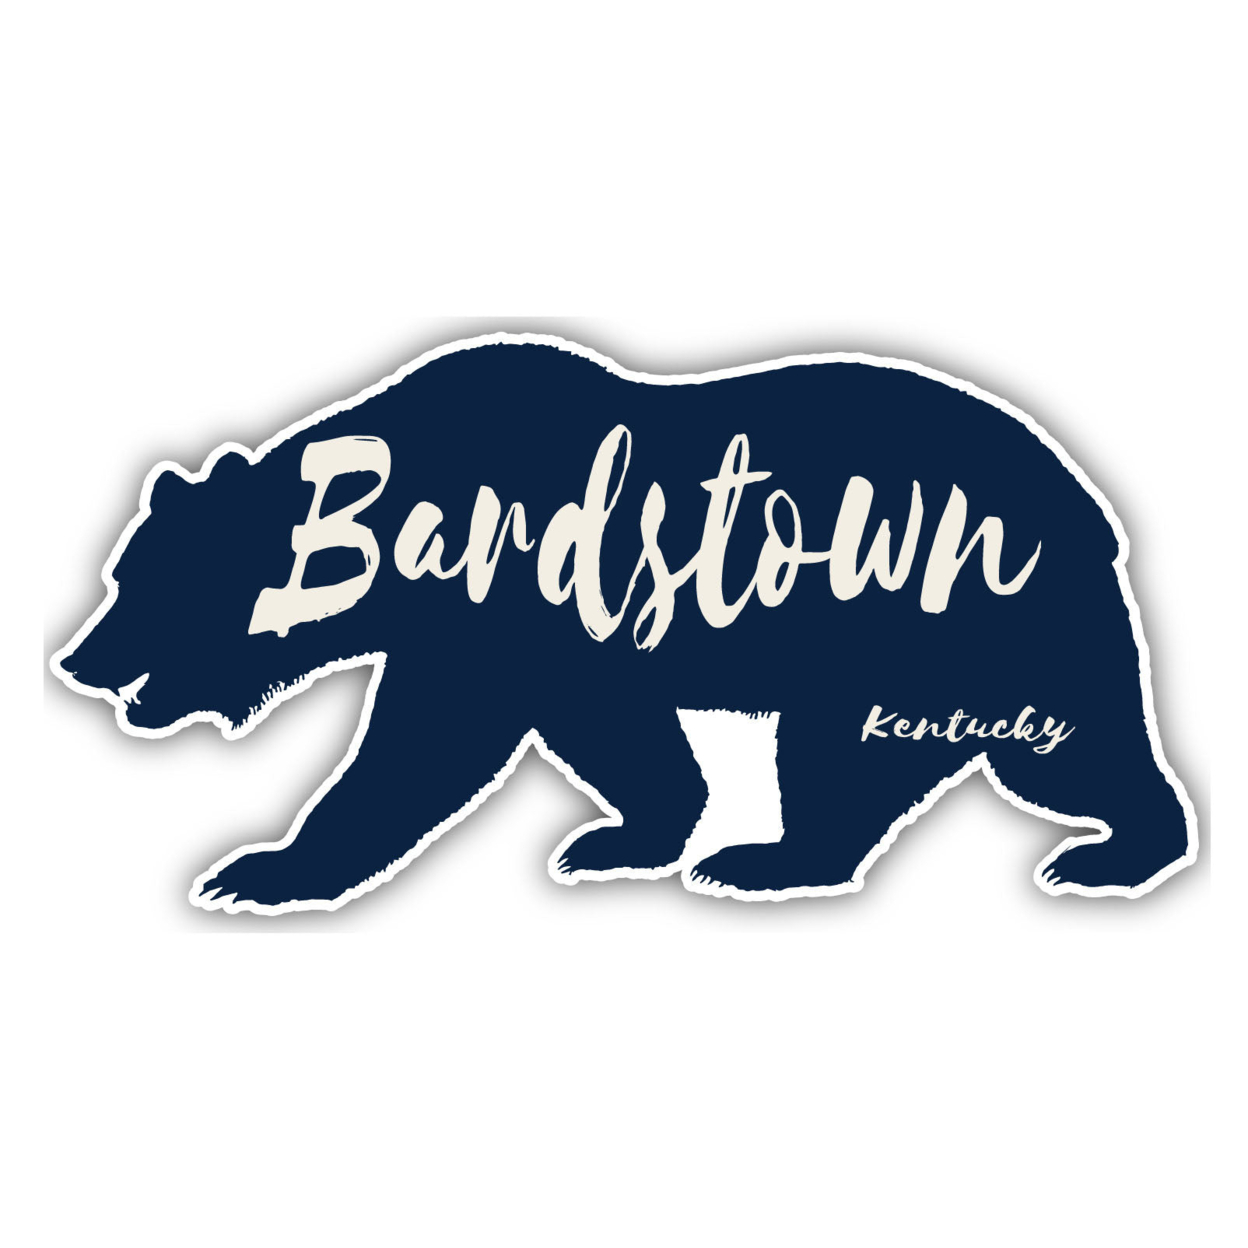 Bardstown Kentucky Souvenir Decorative Stickers (Choose Theme And Size) - 4-Pack, 6-Inch, Bear